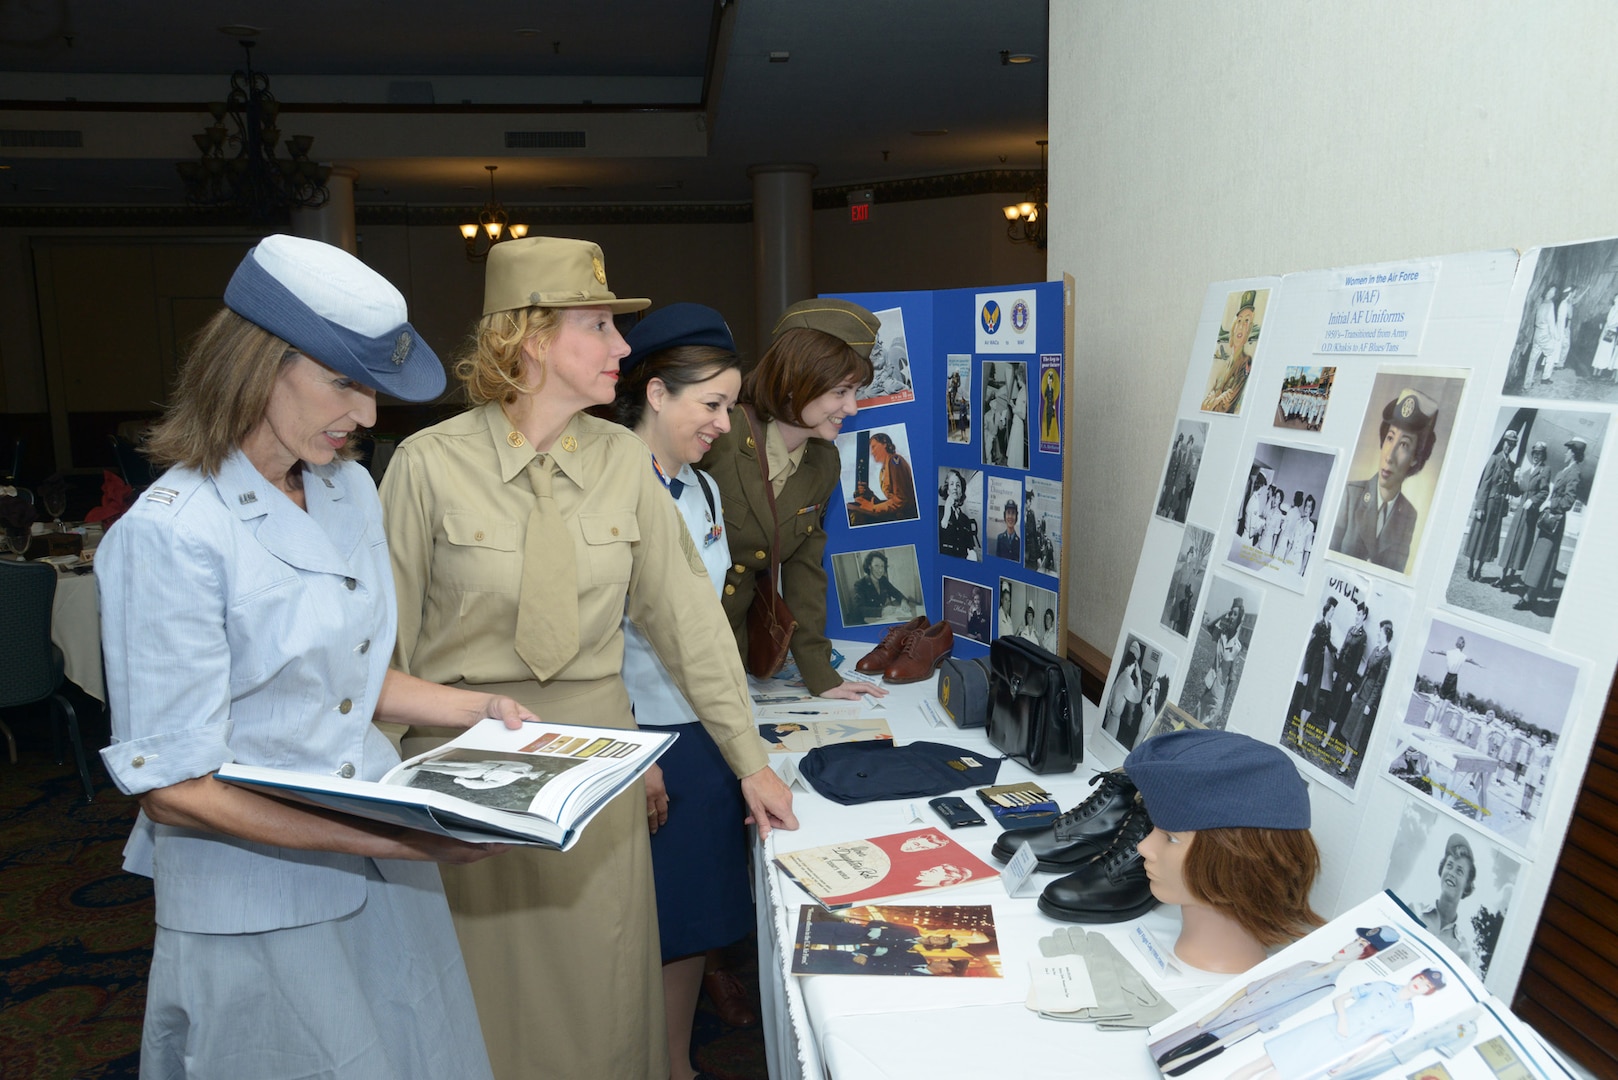 From left: Andrea Gindhart, Kim Kublie, Janet Lujan and Katie Bredeen observe a display Nov. 21 during the Women of the Air Force event sponsored by the JBSA-Randolph Officers' Spouses' Club at the JBSA-Randolph Parr Club. (U.S. Air Force photo by Joel Martinez)